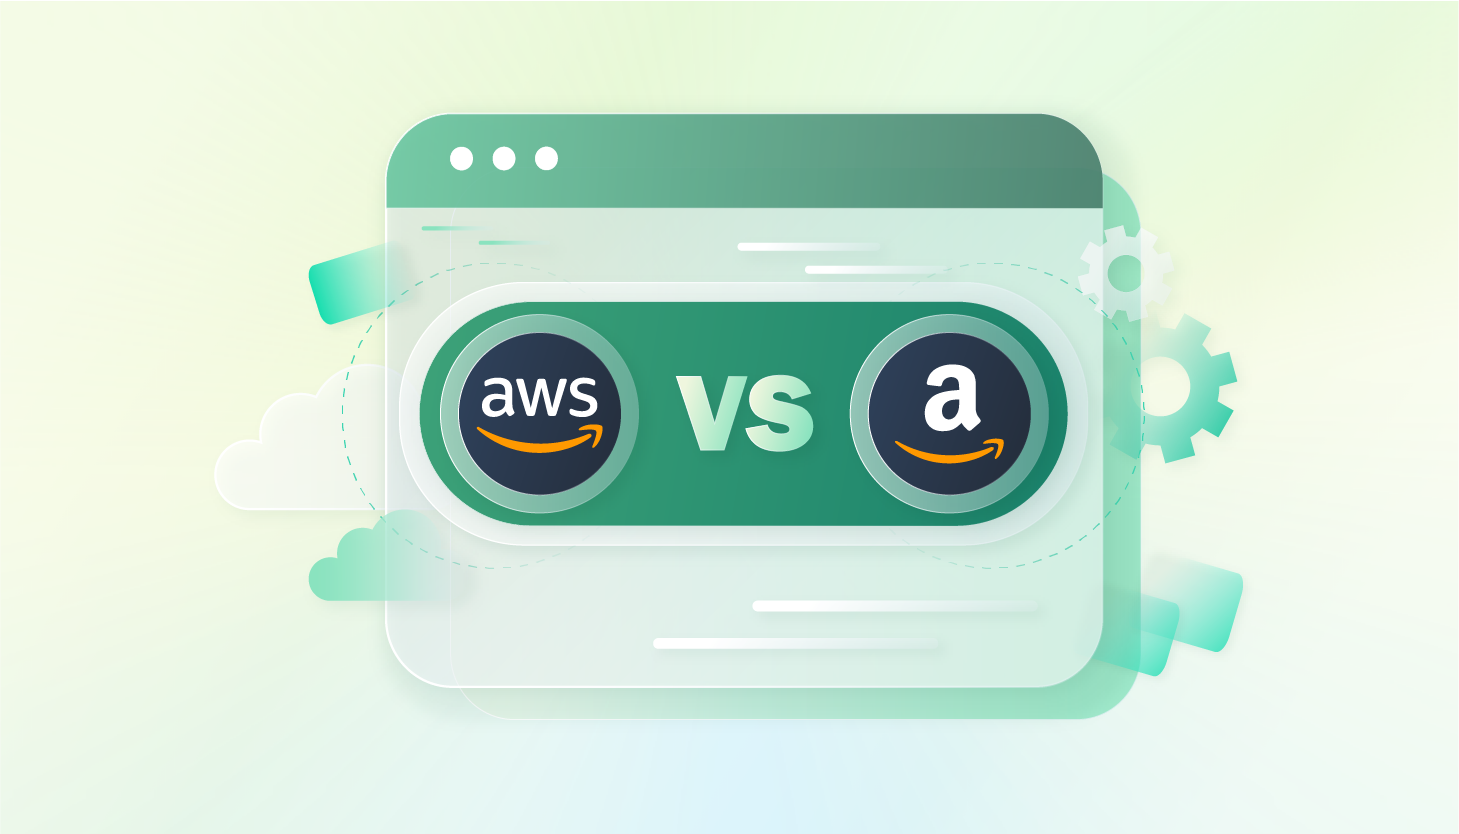 Amazon Web Services vs Amazon Ecosystem: Differences and Similarities